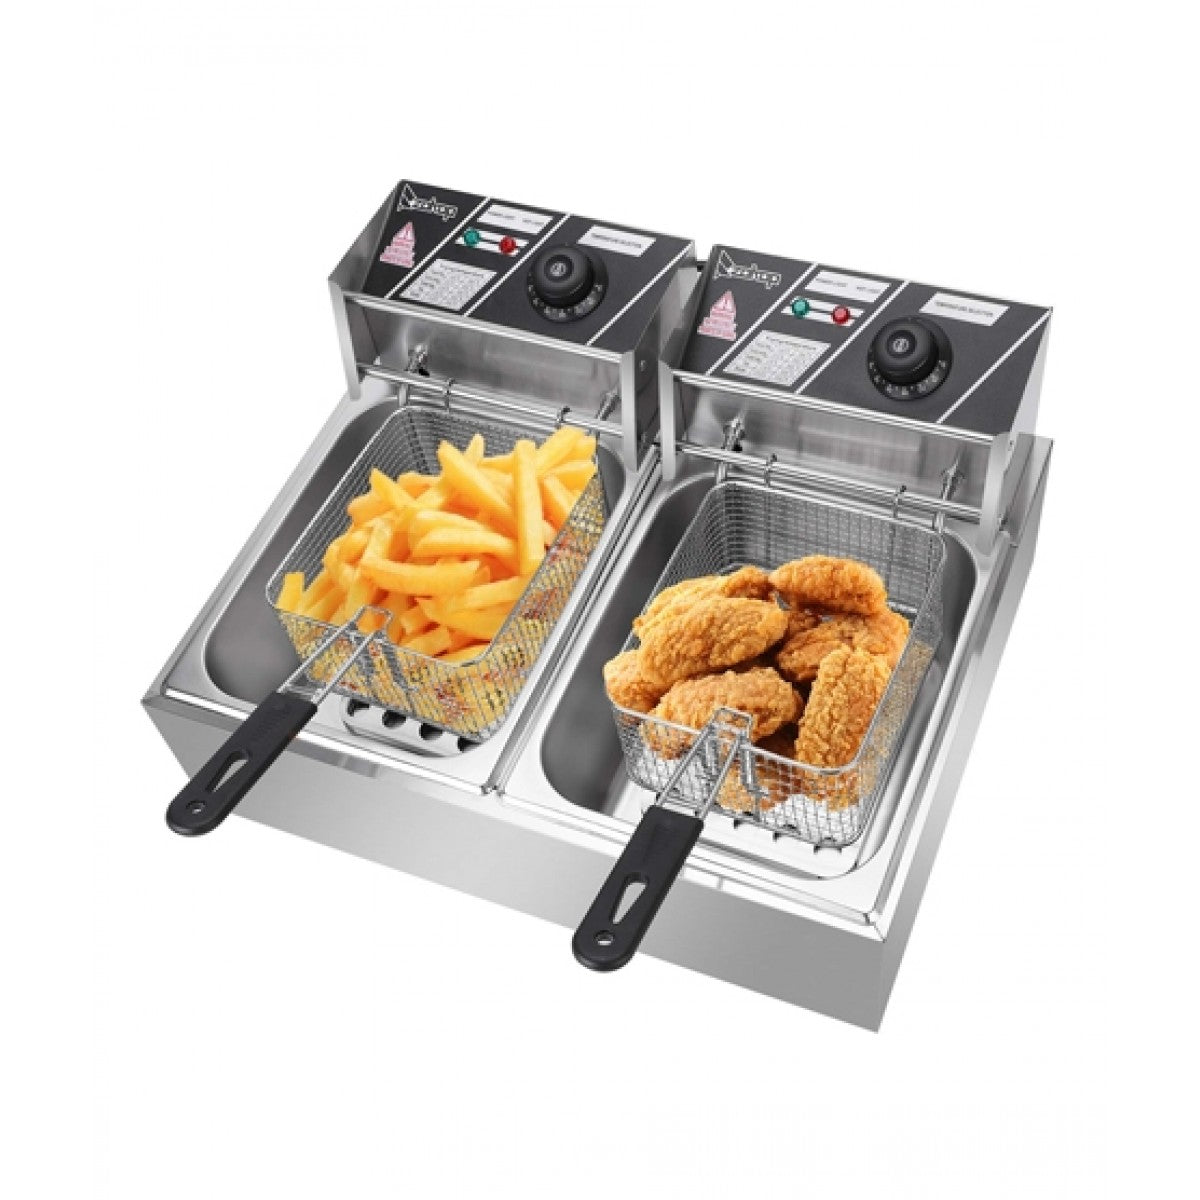 Imported Commercial 12 Liter Deep Fryer with 2 Baskets